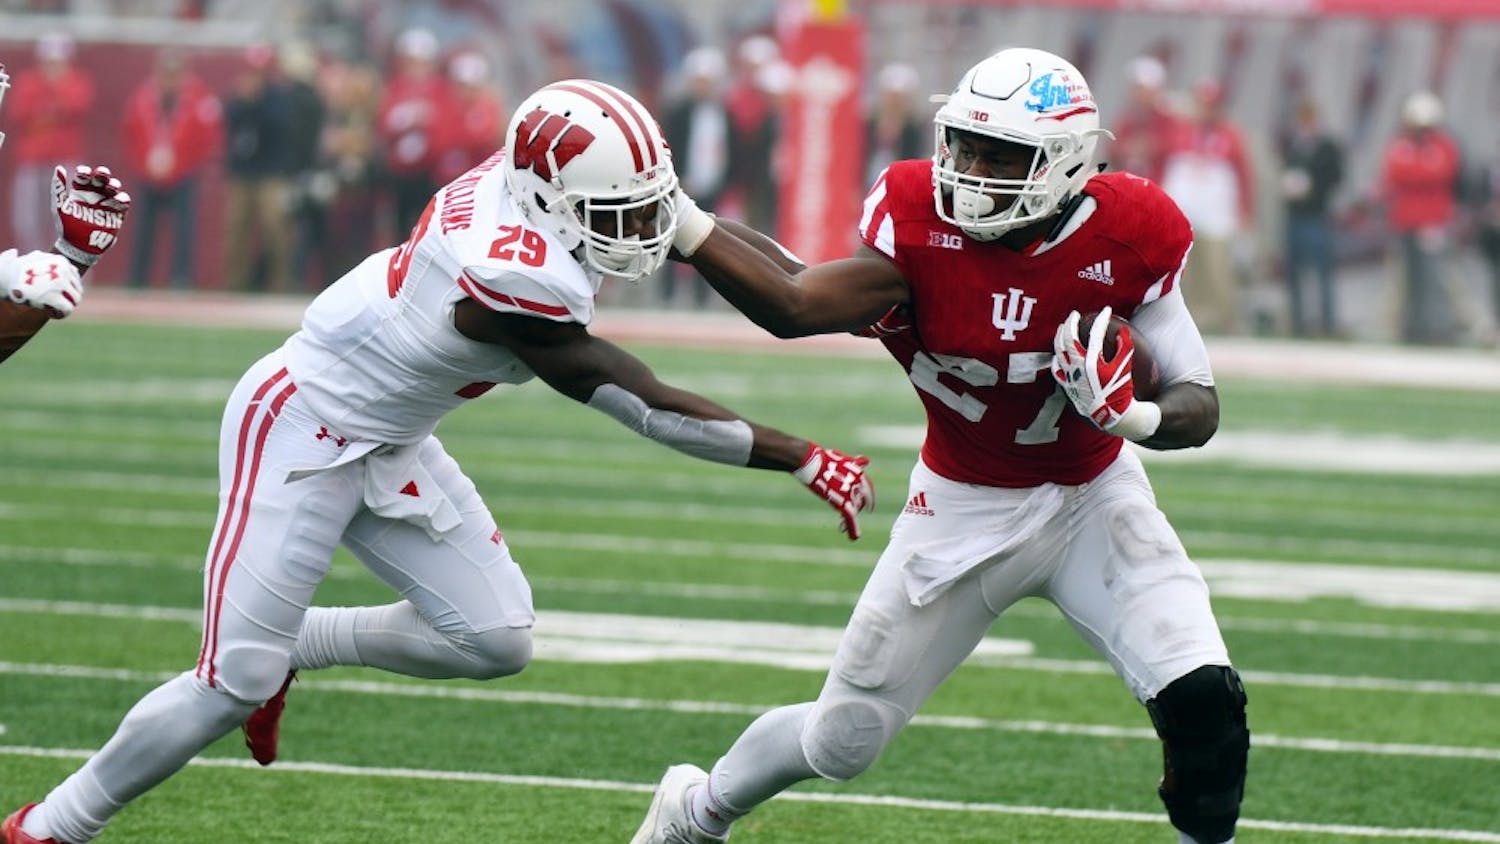 Then-freshman running back Morgan Ellison avoids being tackled during the first half against Wisconsin on Nov. 4, 2017, at Memorial Stadium. Ellison released a statement on Twitter stating that he was falsely accused of sexual assault.&nbsp;